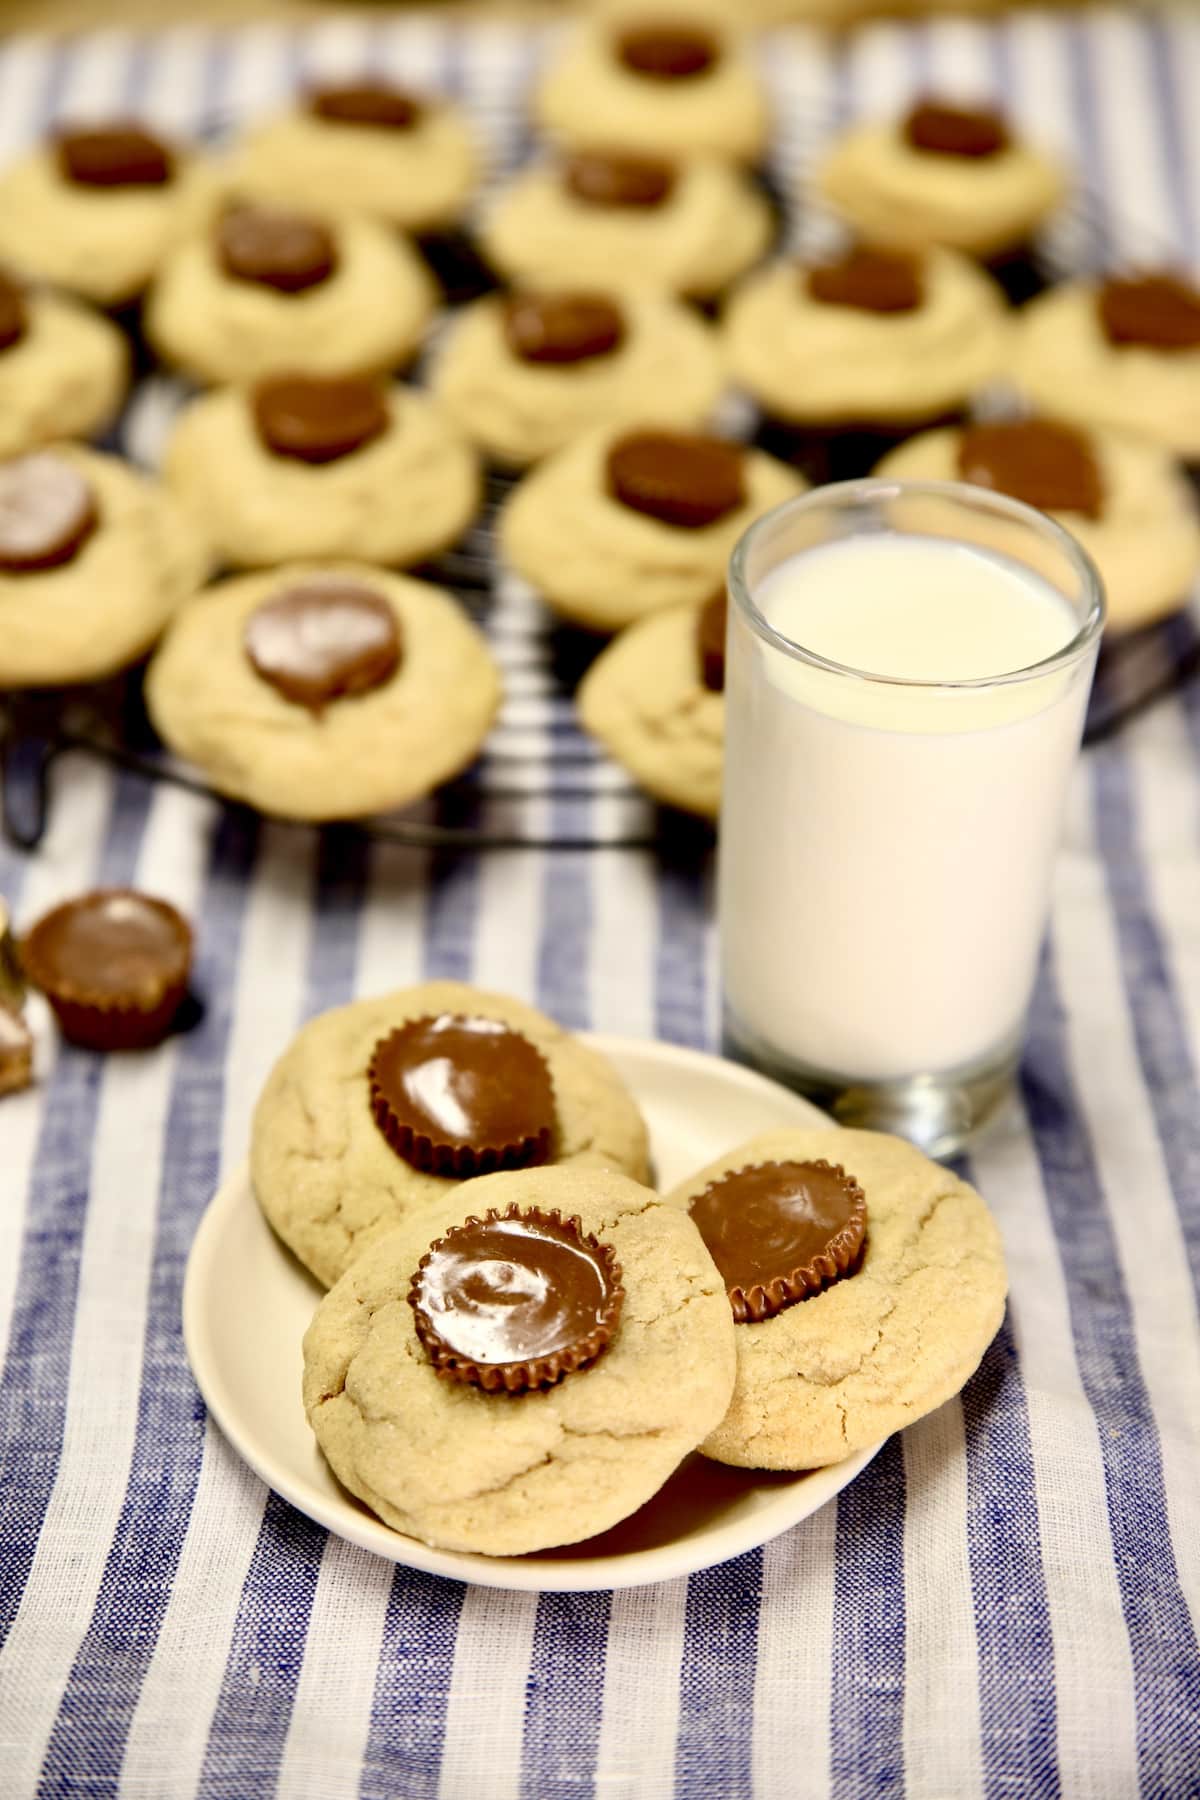 3 peanut butter cup cookies on a plate, cooling rack and glass of milk.